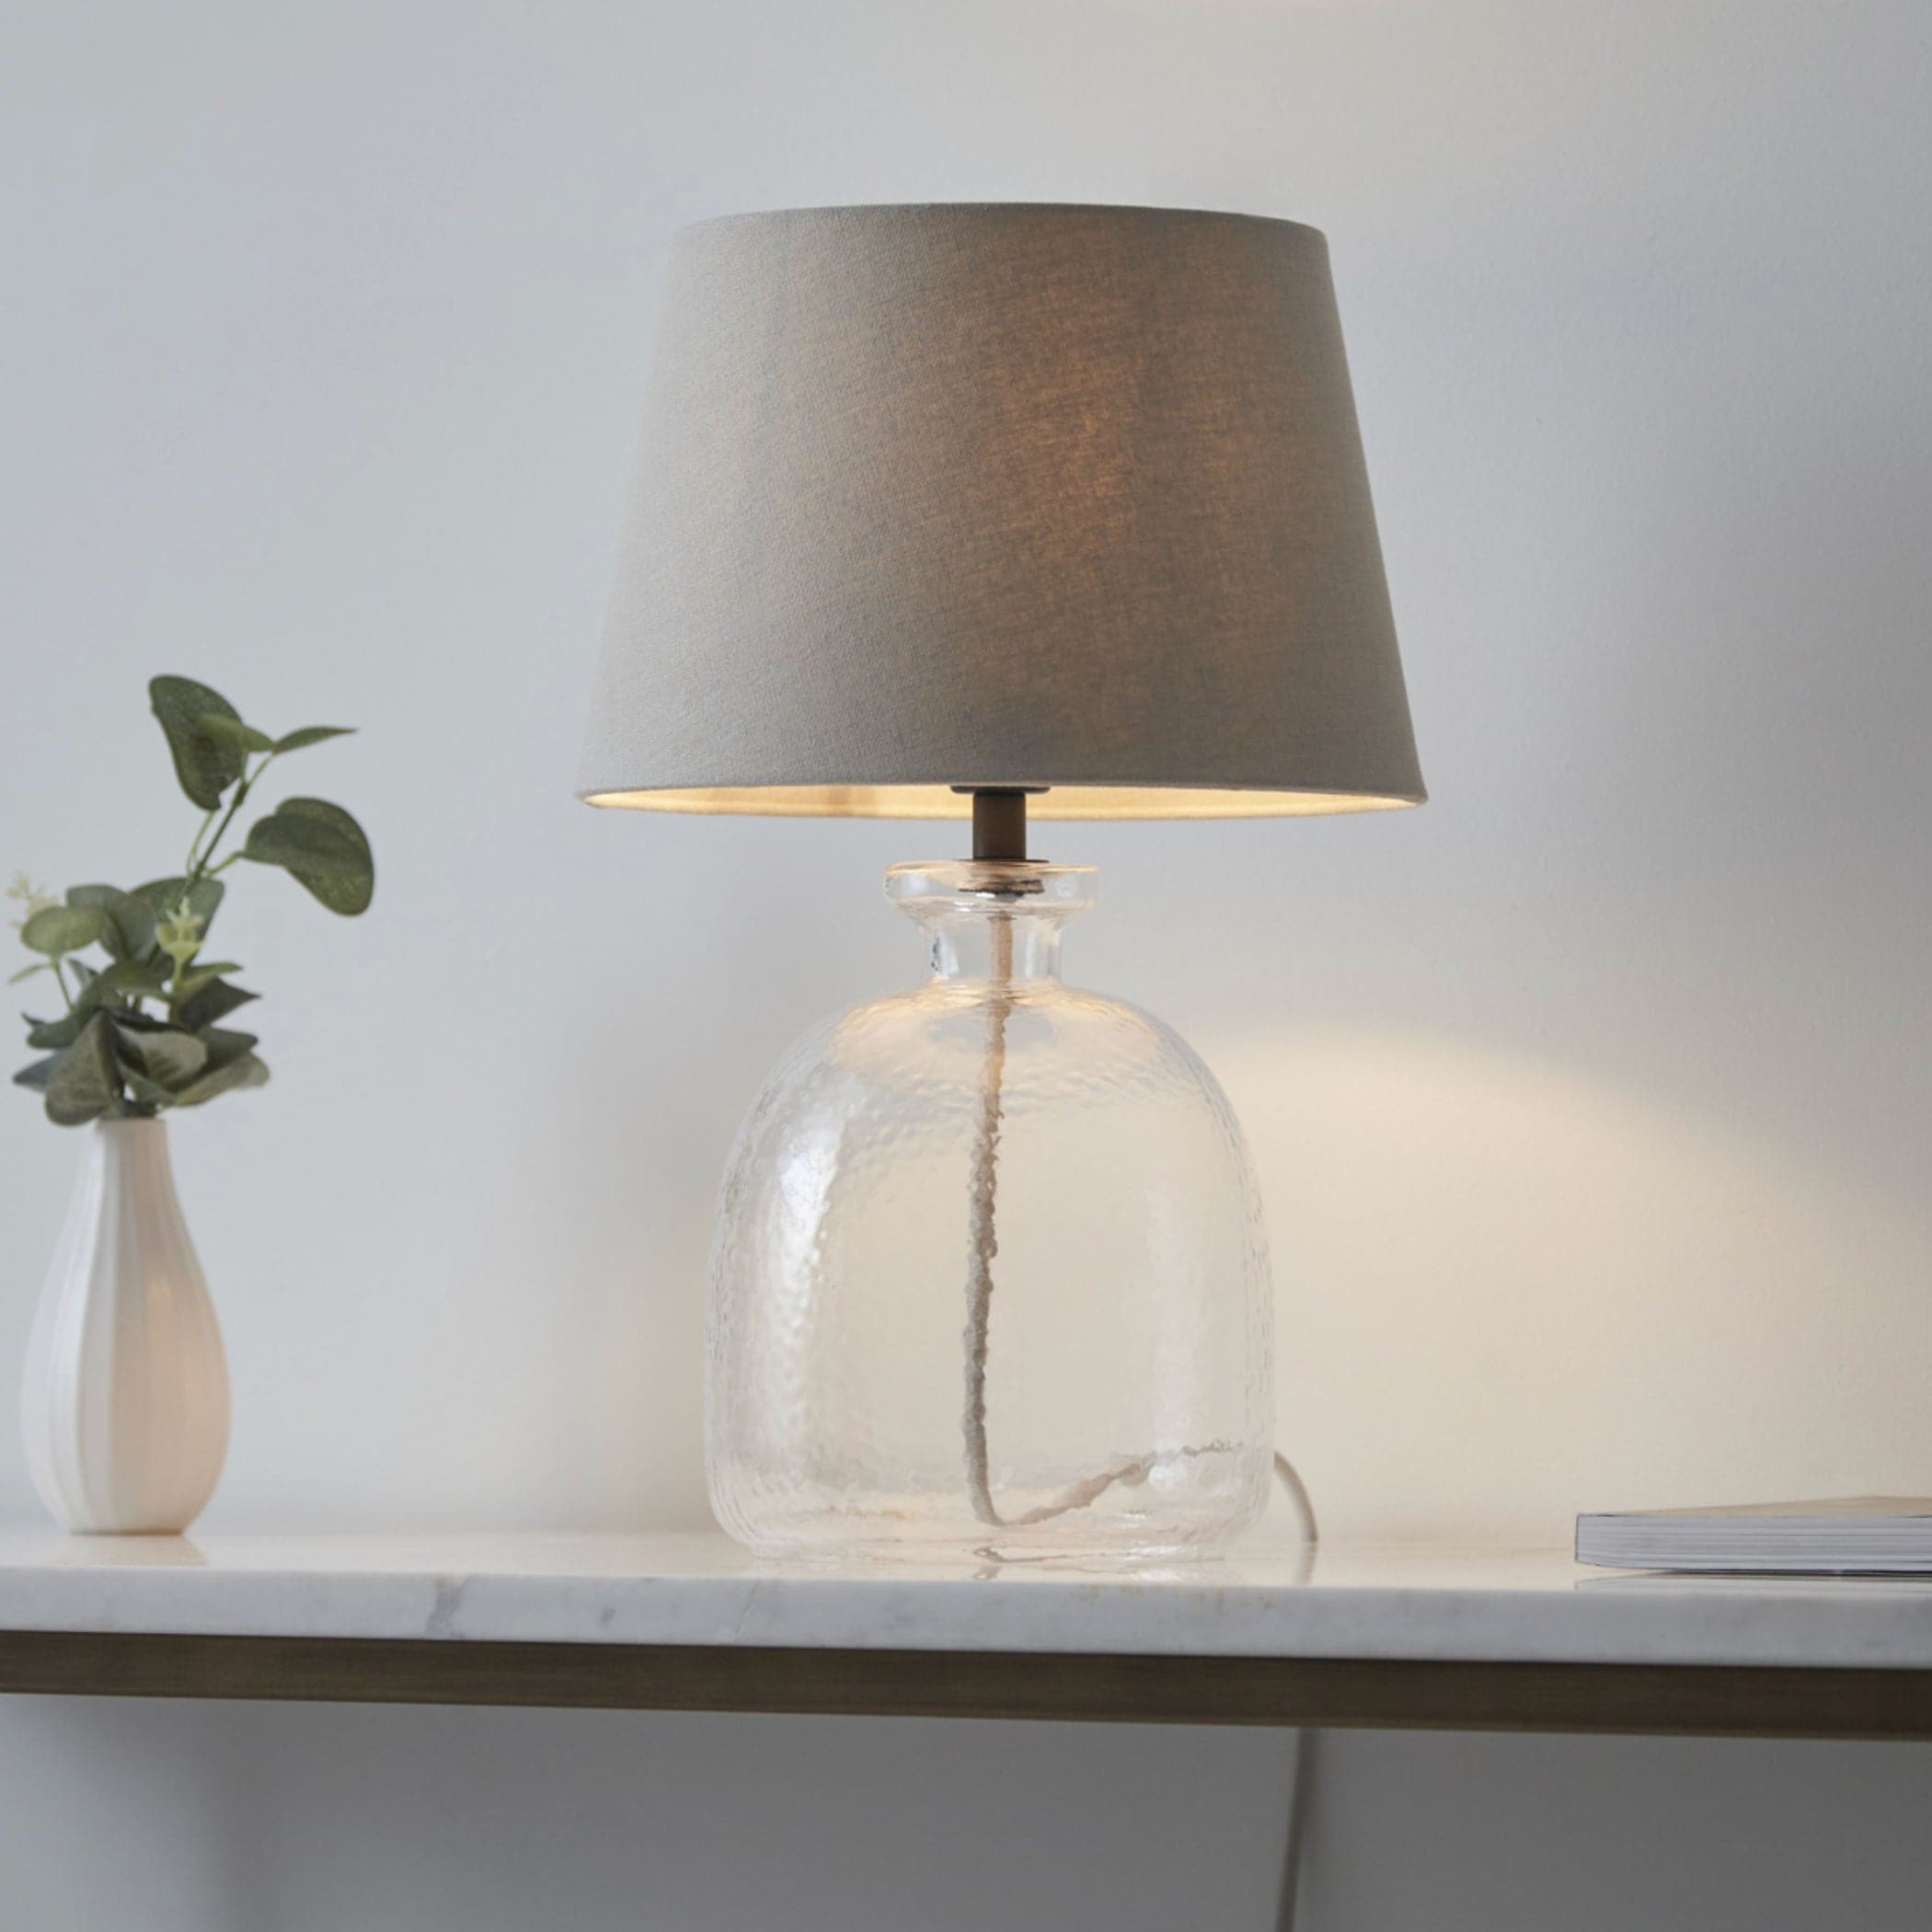 Textured Effect Glass Table Lamp & Shade